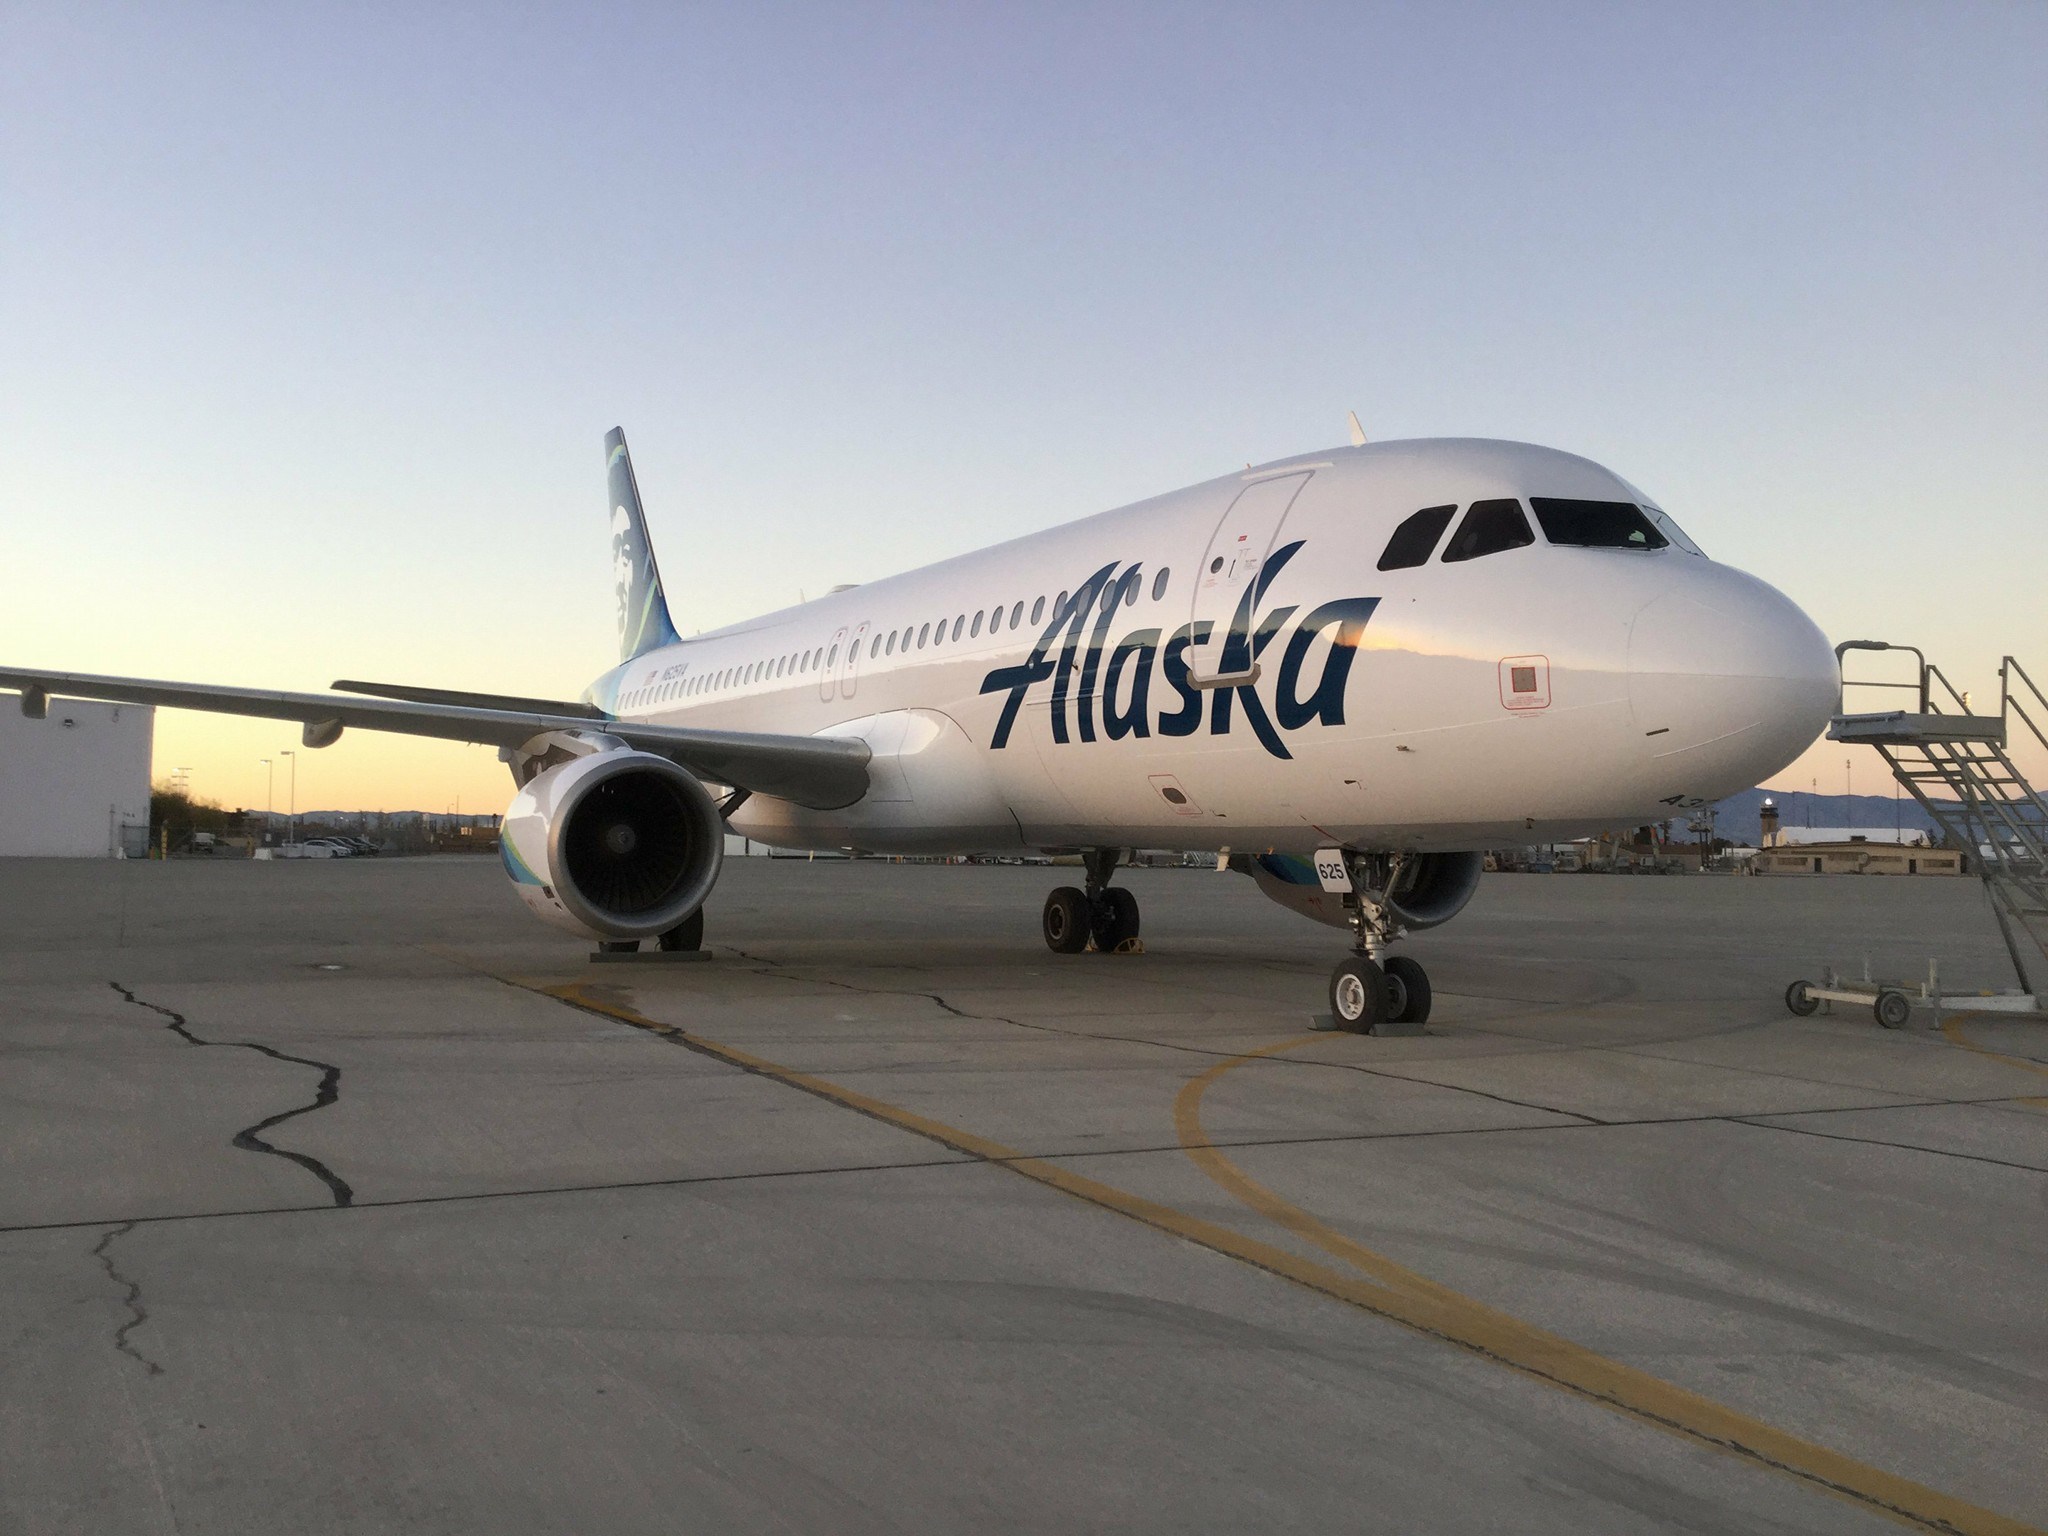 Alaska Airlines celebrates 35 years of connecting guests with Mexico